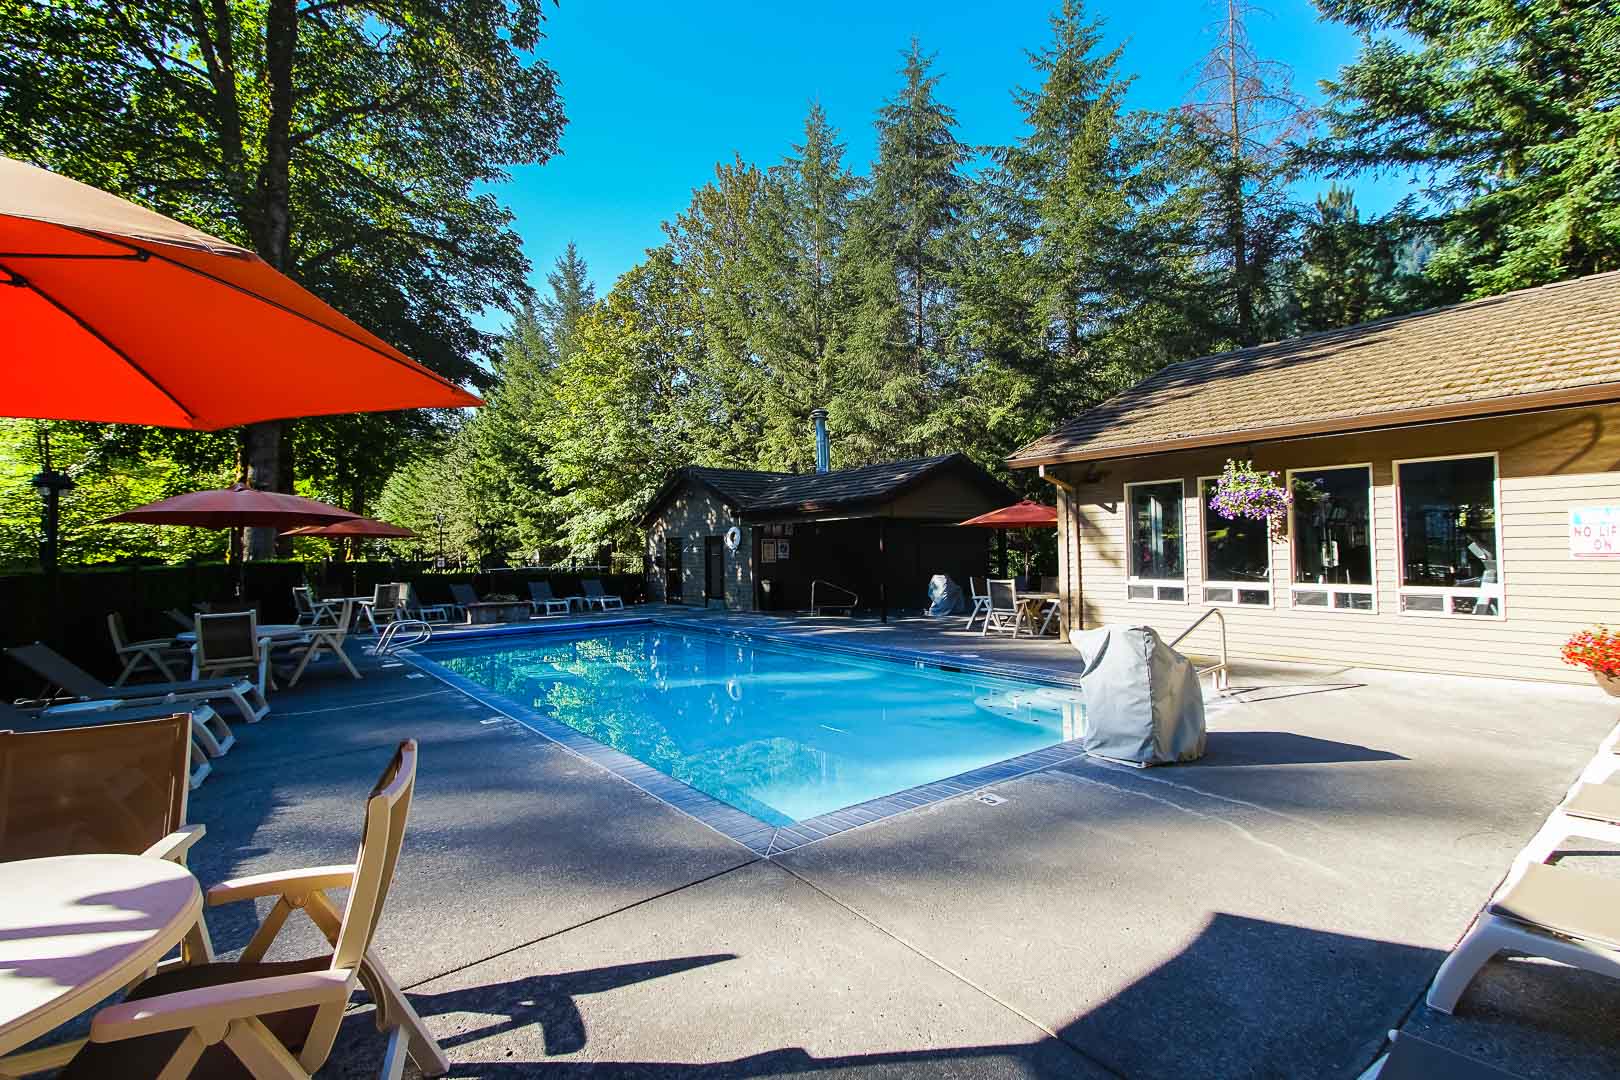 A spacious outdoor swimming pool at VRI's Whispering Woods Resort in Oregon.